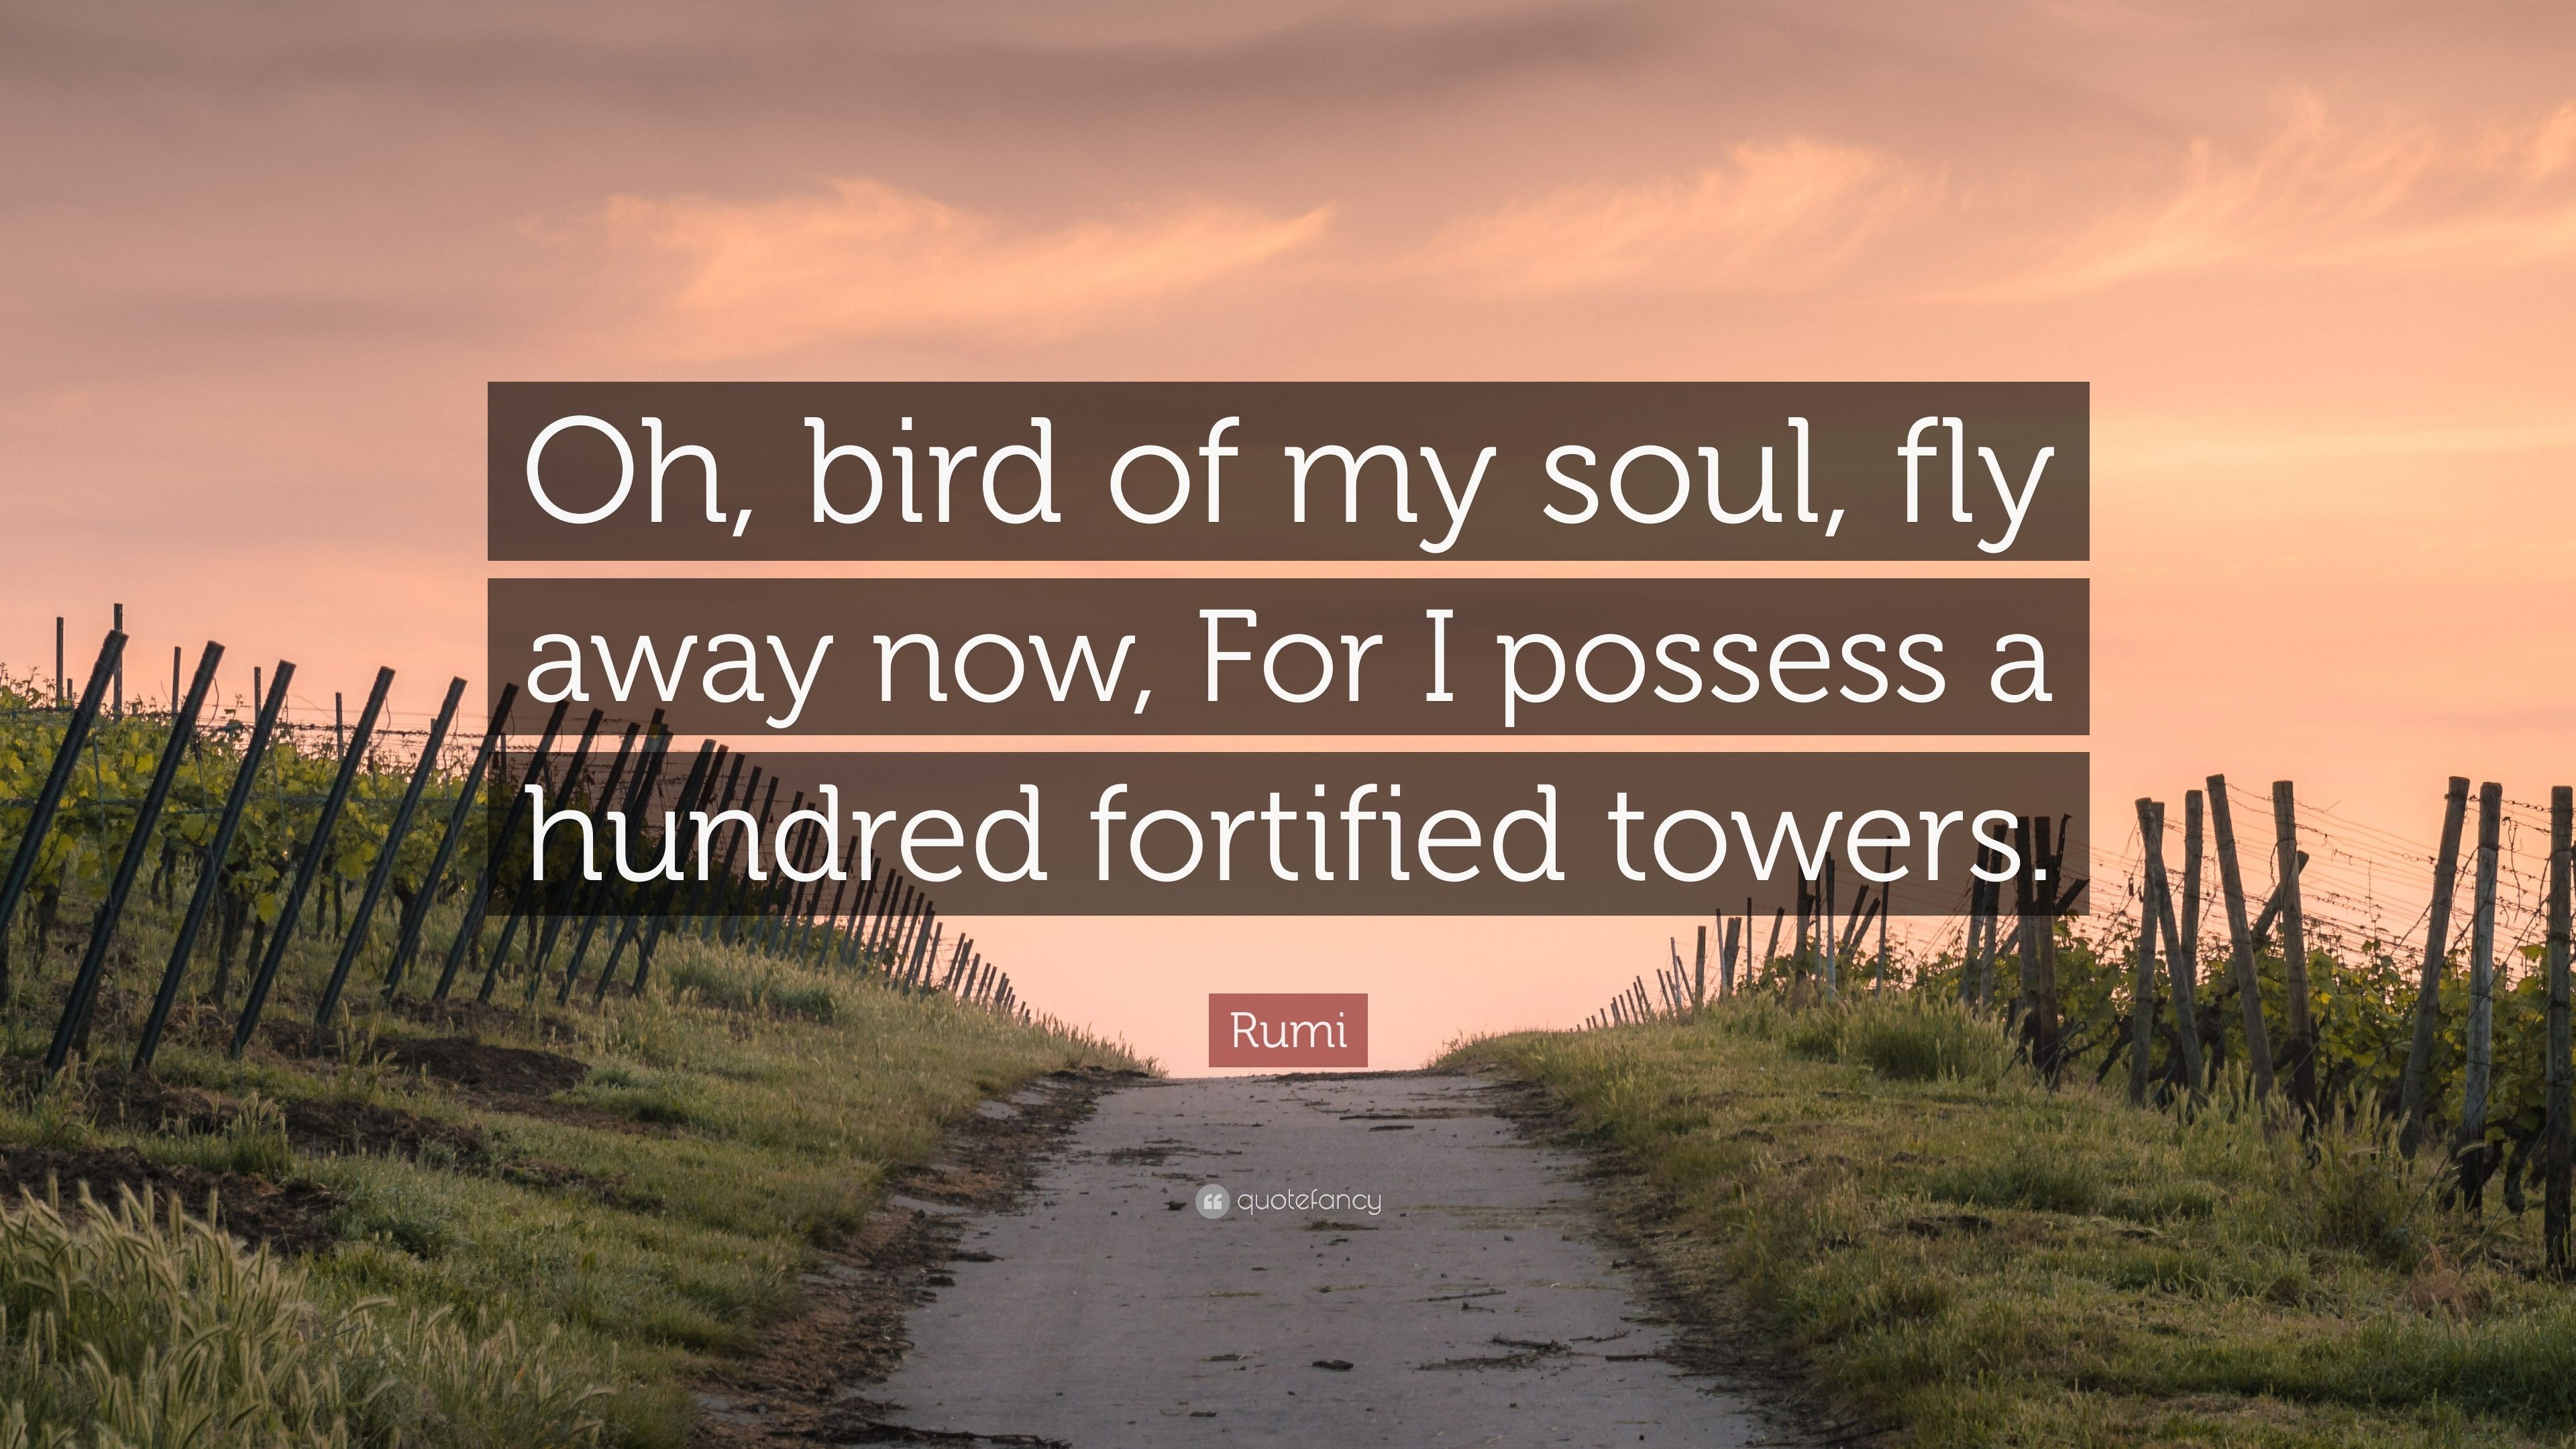 3840x2160 Rumi Quote: “Oh, bird of my soul, fly away now, For